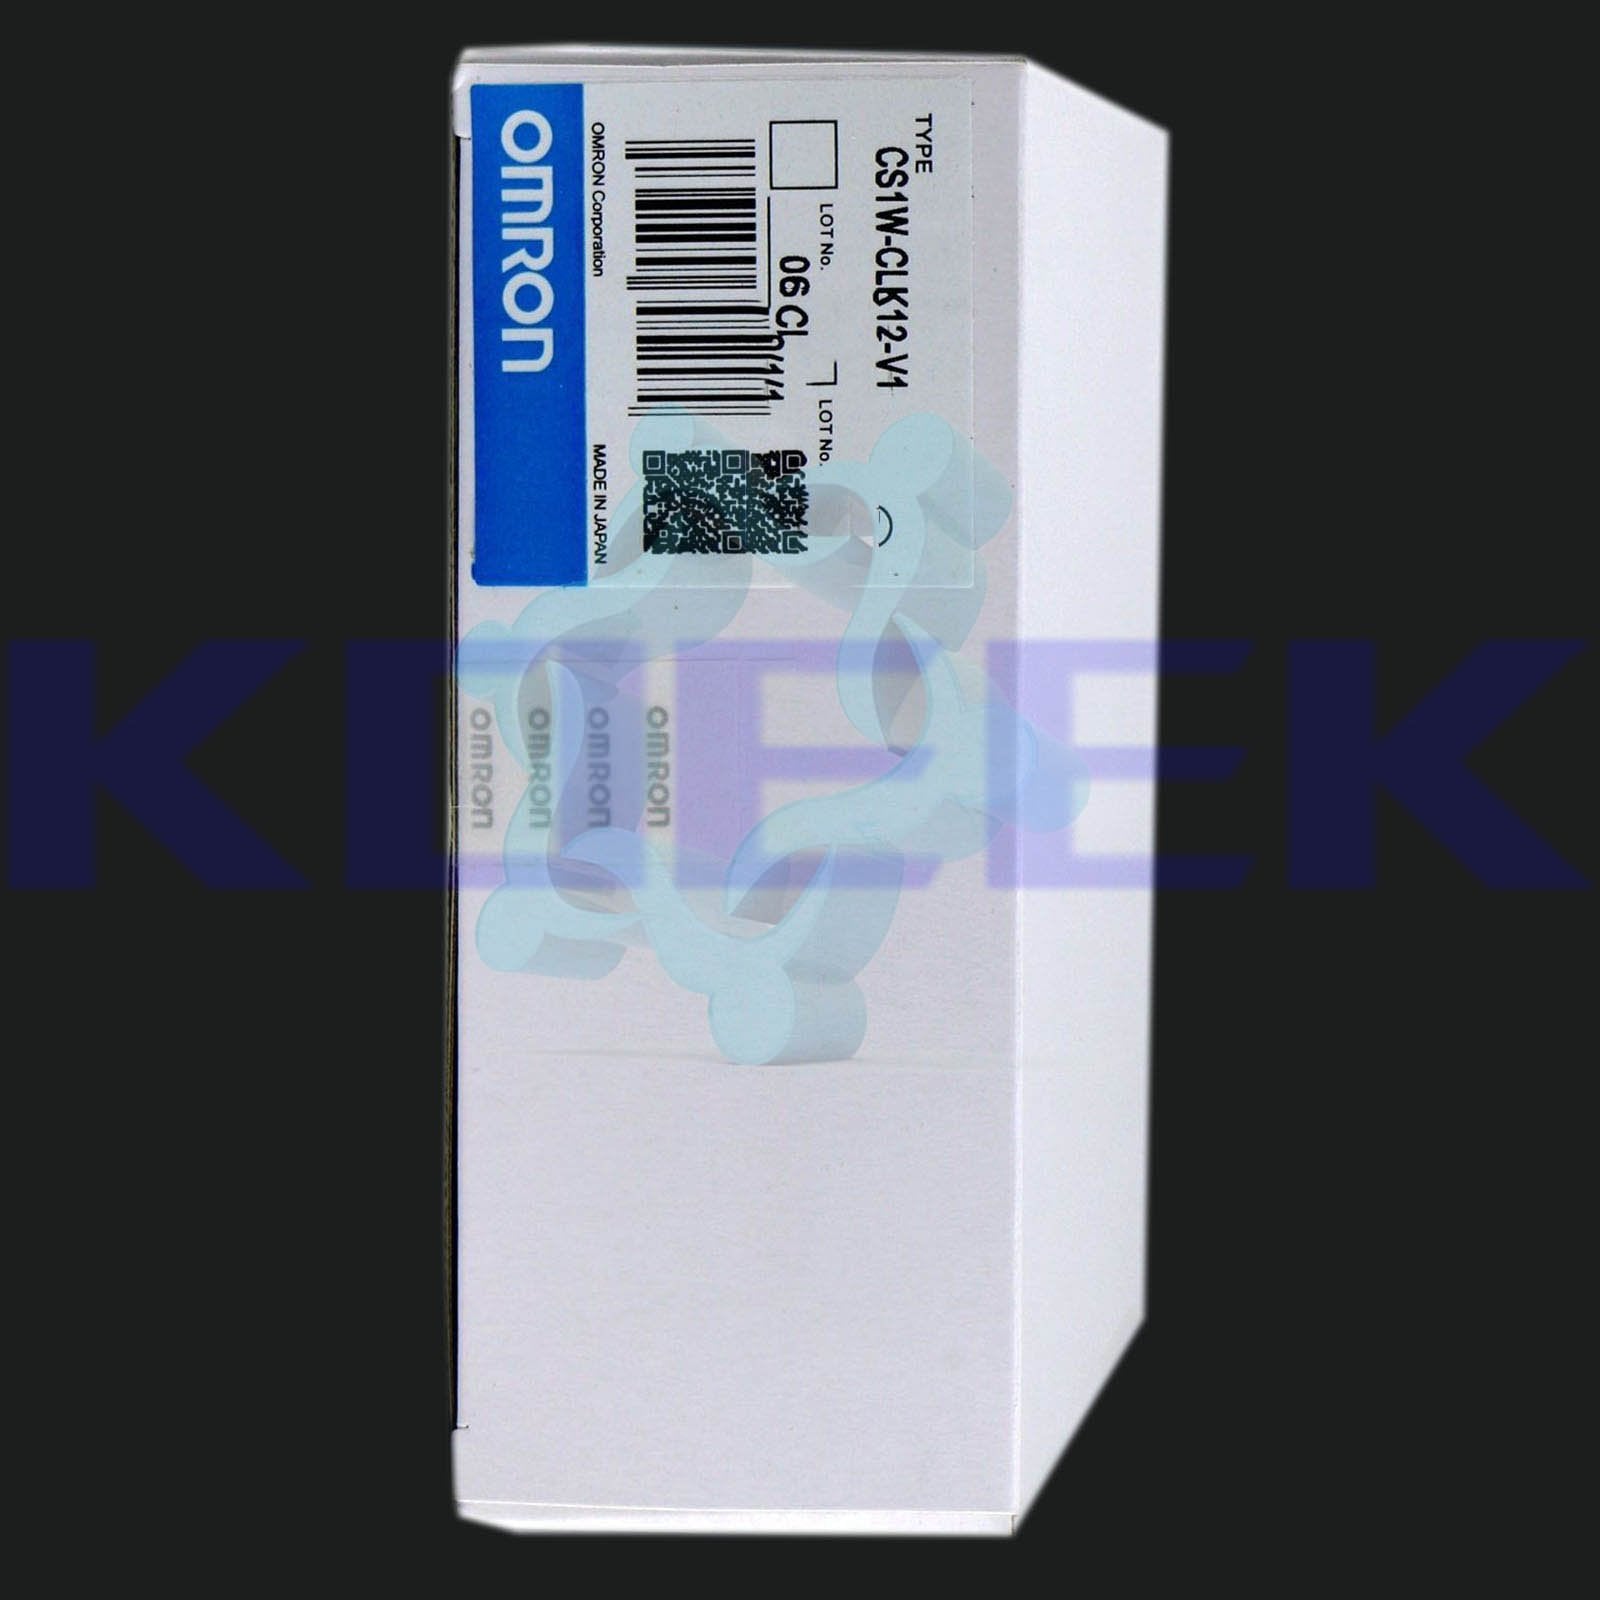 CS1W-CLK12-V1 KOEED 201-500, 90%, import_2020_10_10_031751, Omron, Other